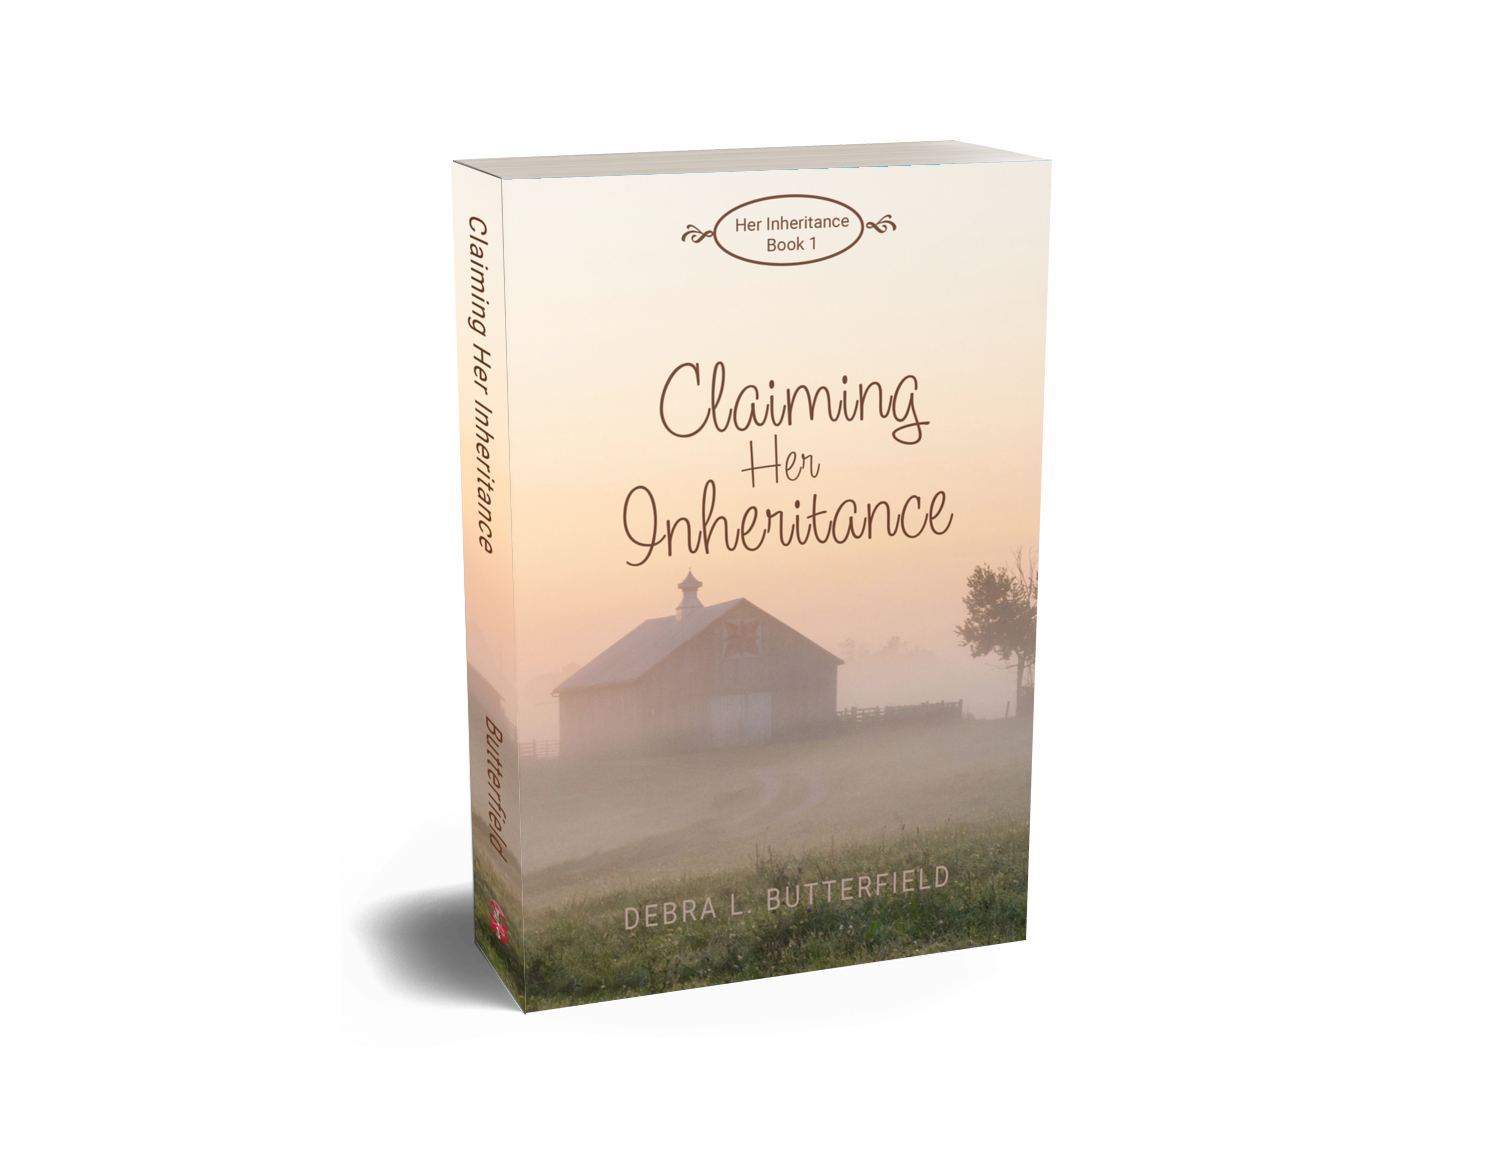 Claiming her Inheritance by Debra L Butterfield released by Christian publisher CrossRiver Media Group